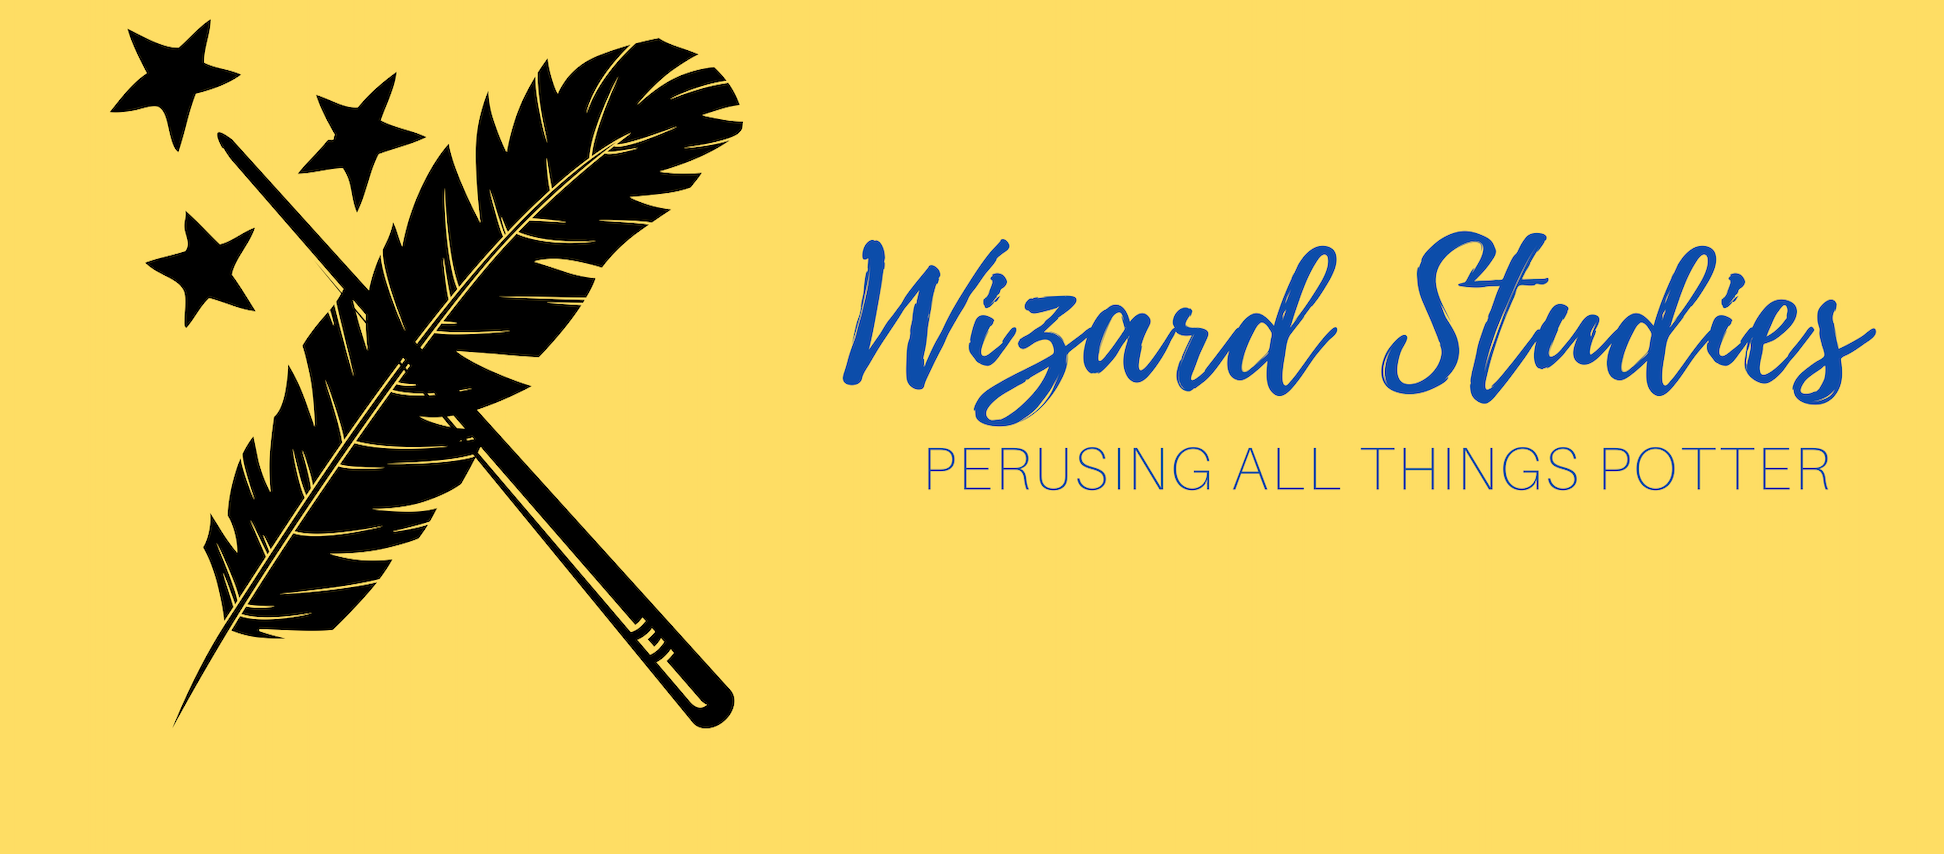 Wizard Studies: Perusing All Things Potter Podcast